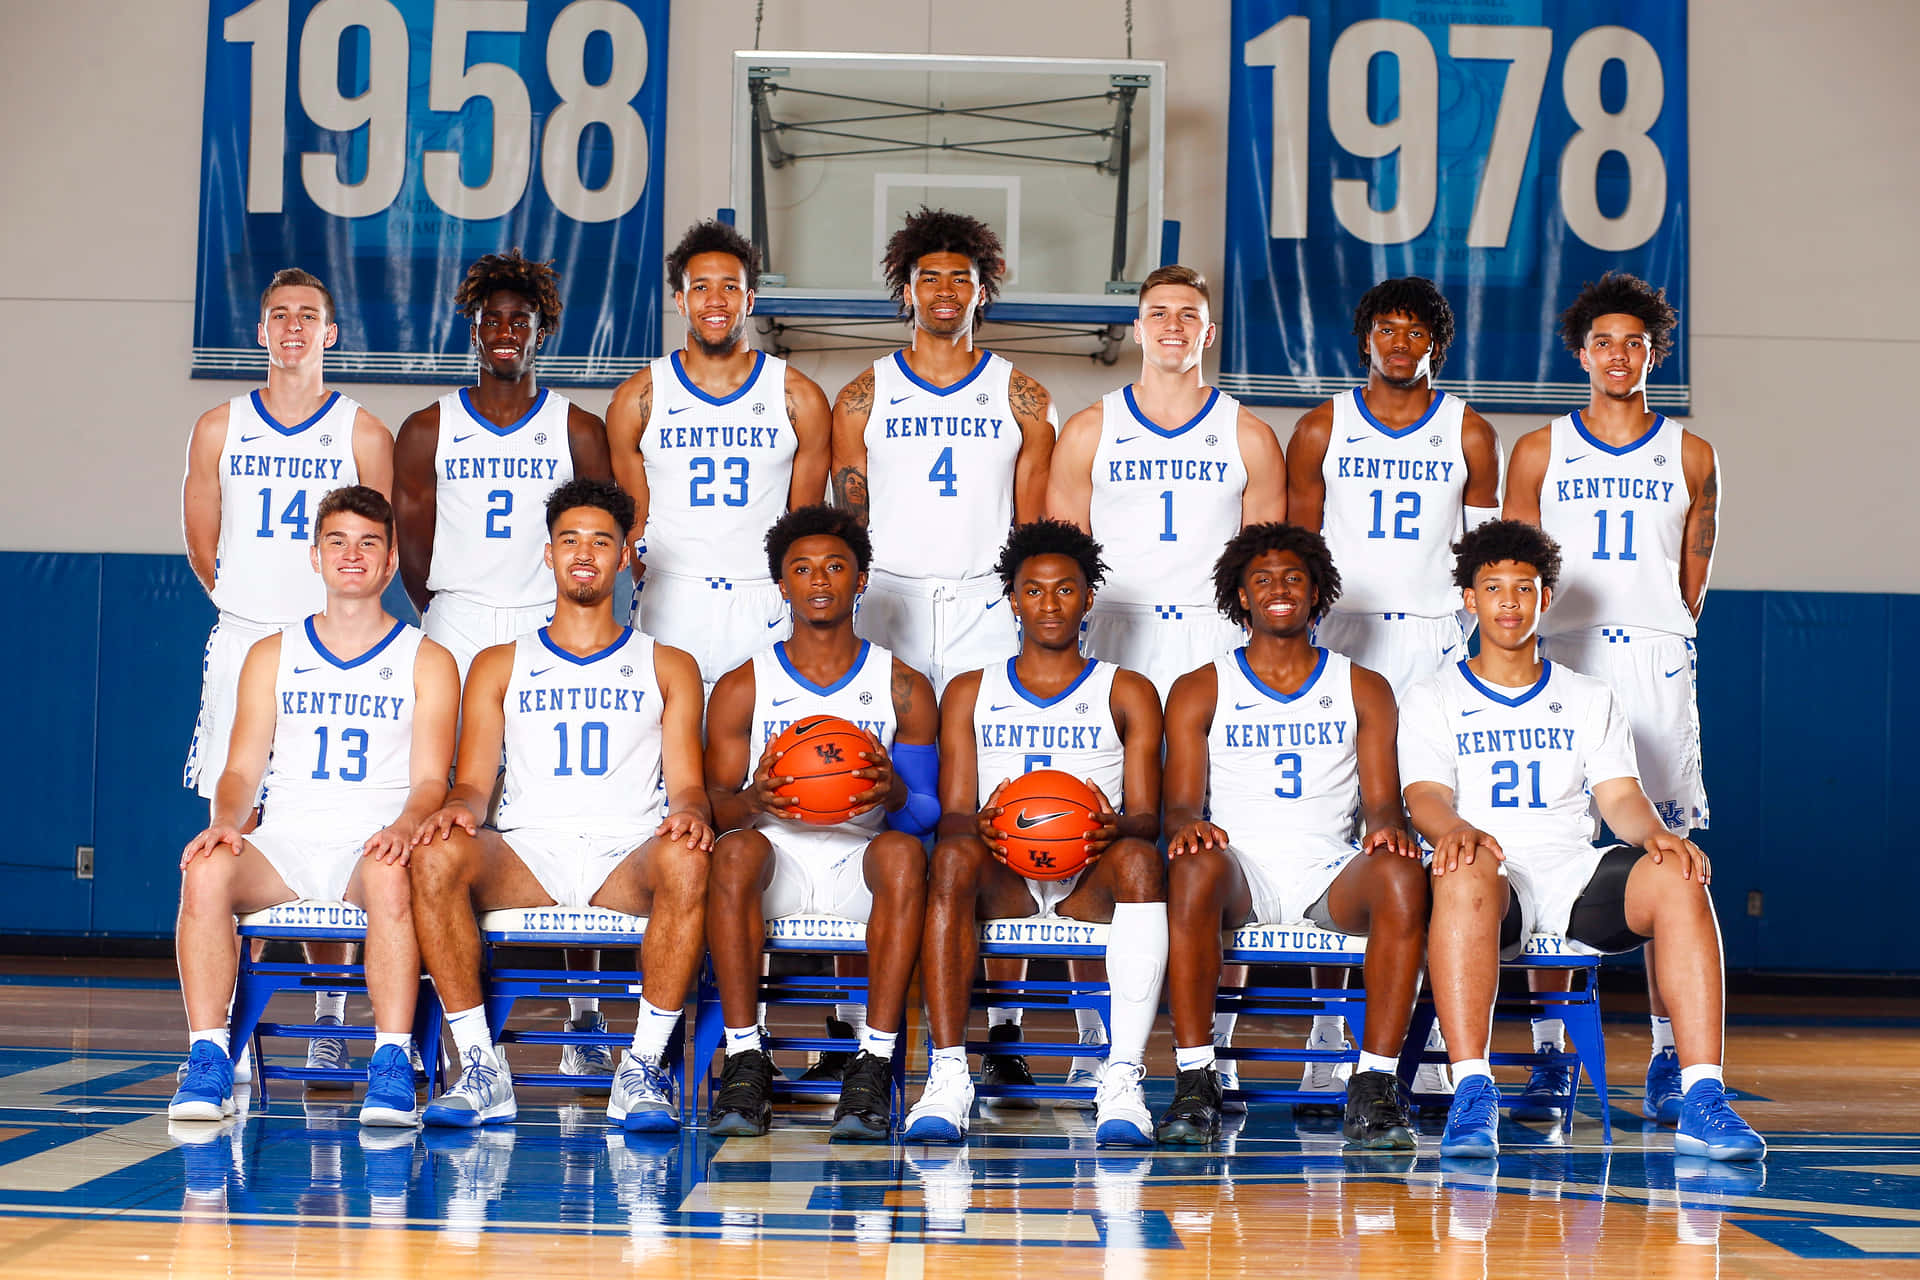 The Basketball Team Is Posing For A Photo Wallpaper